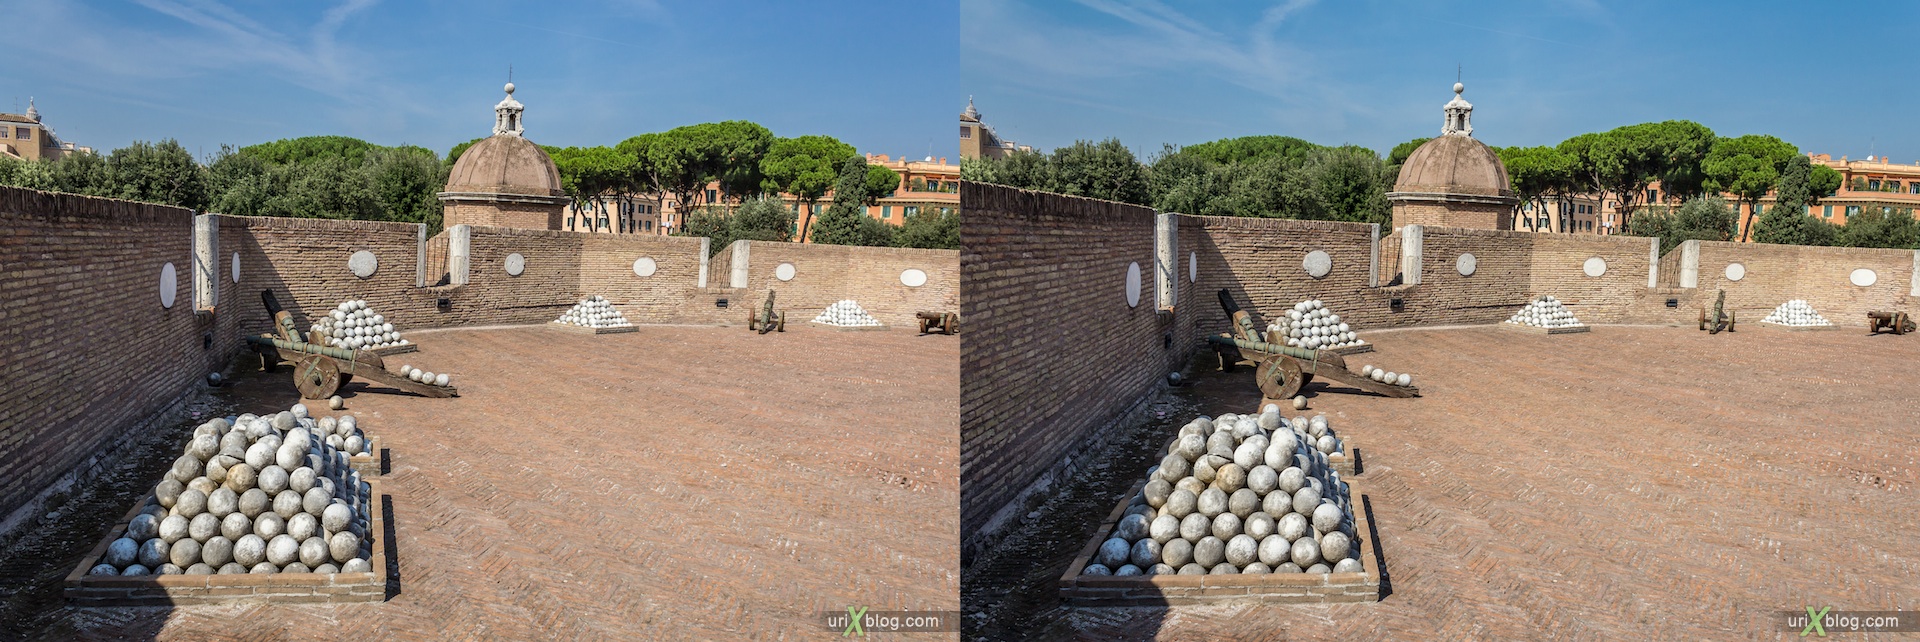 2012, Castel Sant Angelo, Mausoleum of Hadrian, 3D, stereo pair, cross-eyed, crossview, cross view stereo pair